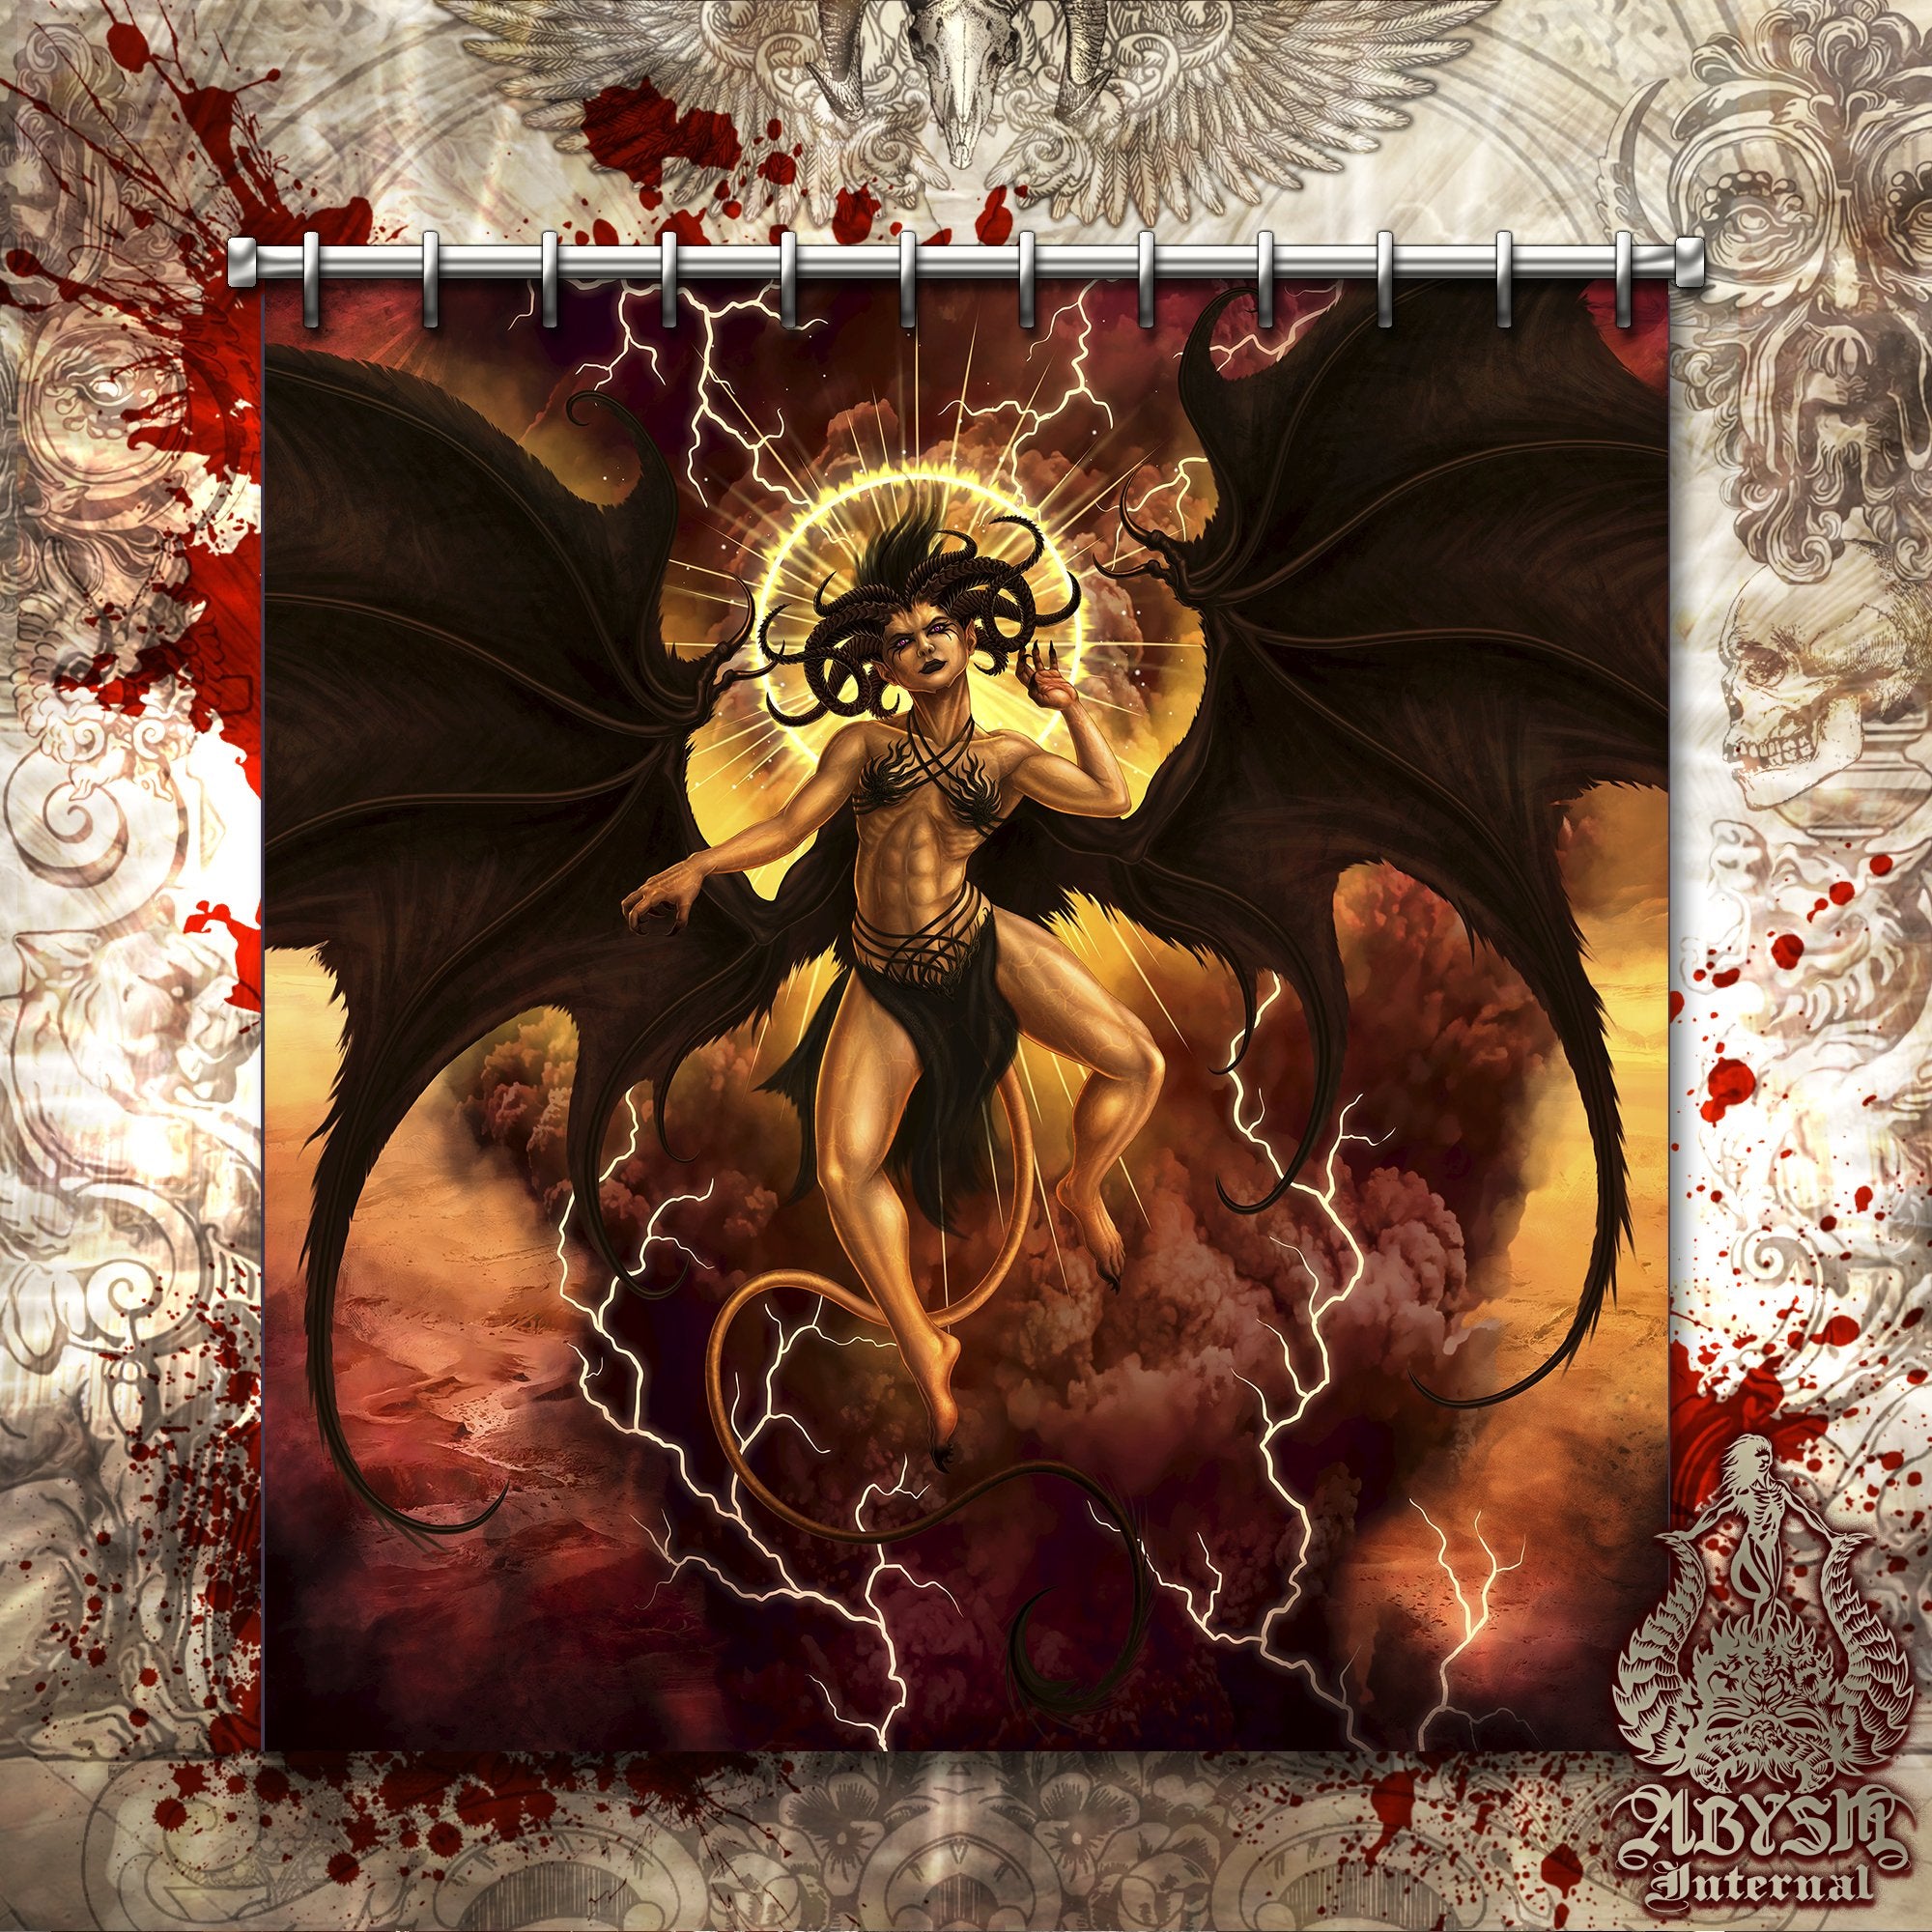 Lilith Shower Curtain, 71x74 inches, Demon Art, NSFW Satanic Bathroom Decor, Dark and Erotic Fantasy - Clothed, Semi, Nude, 3 Options - Abysm Internal